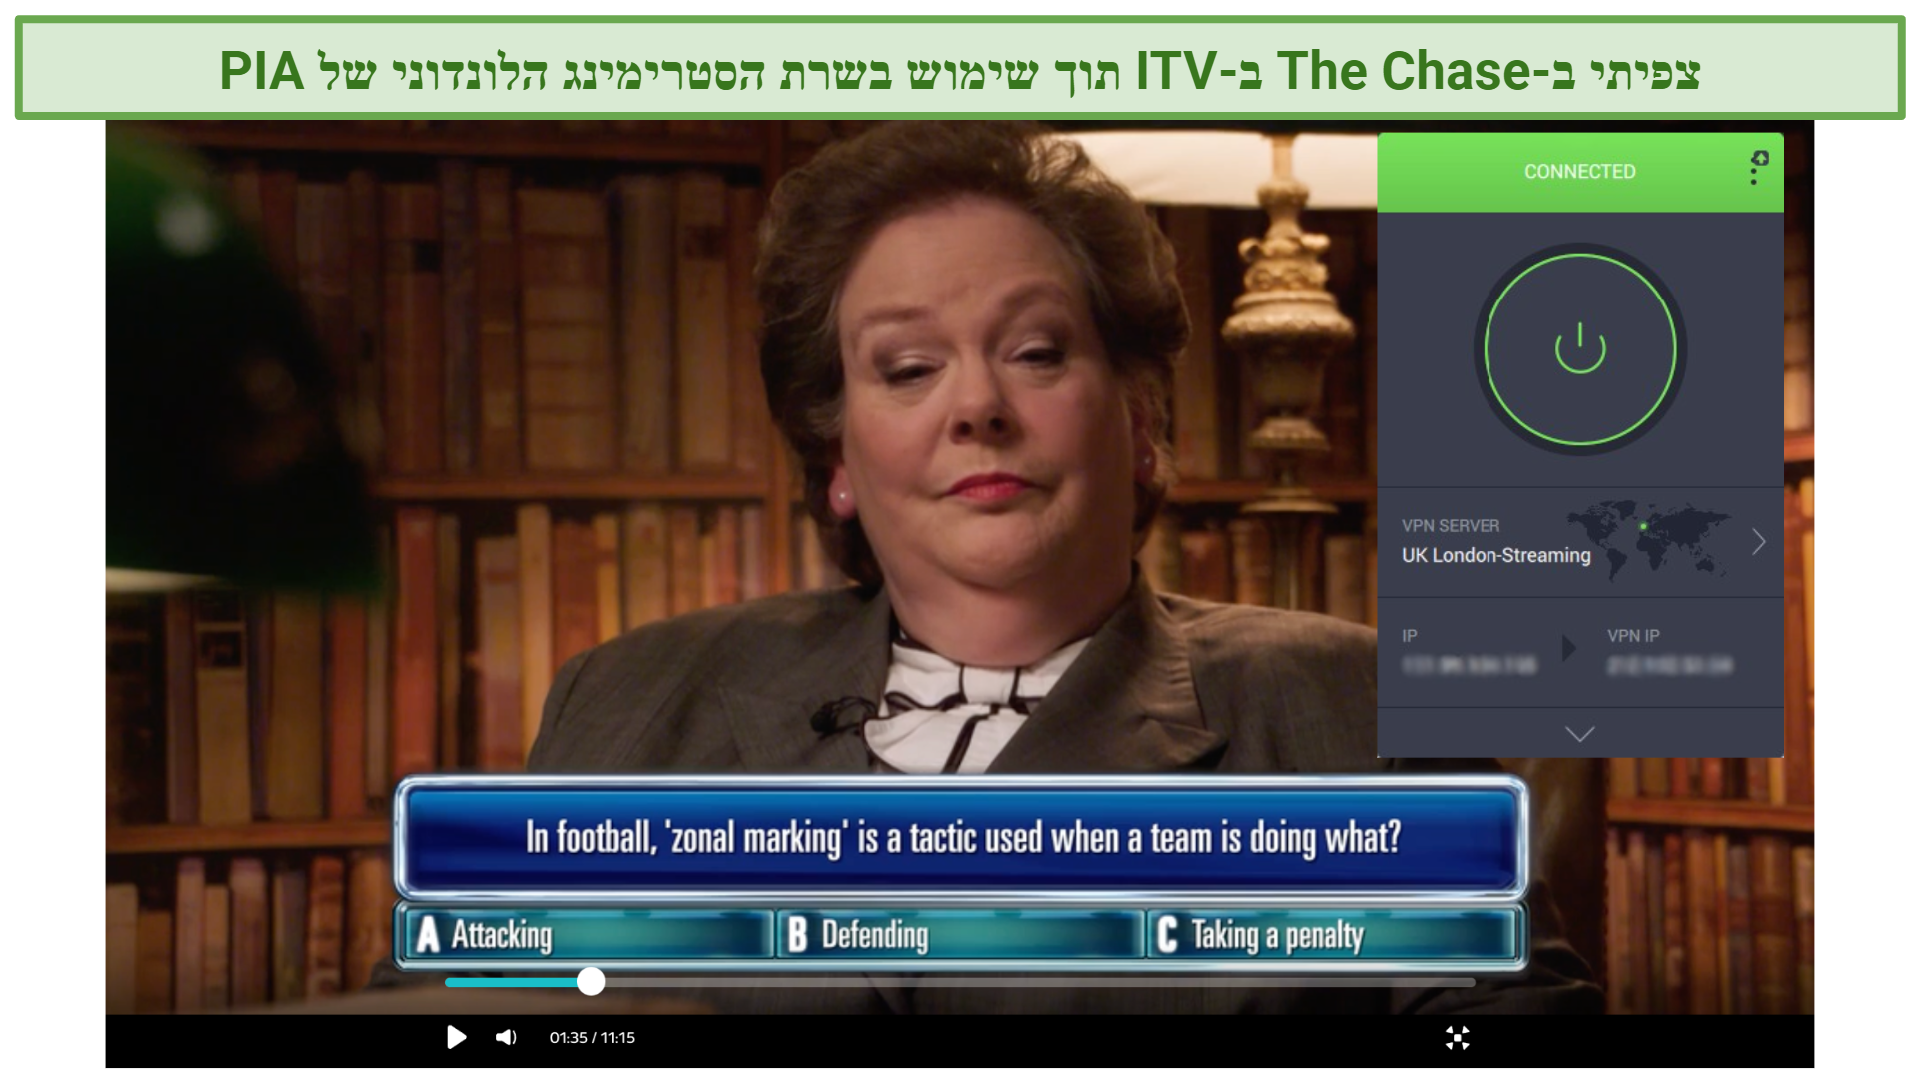 Screenshot showing The Chase streaming on ITV while using PIA